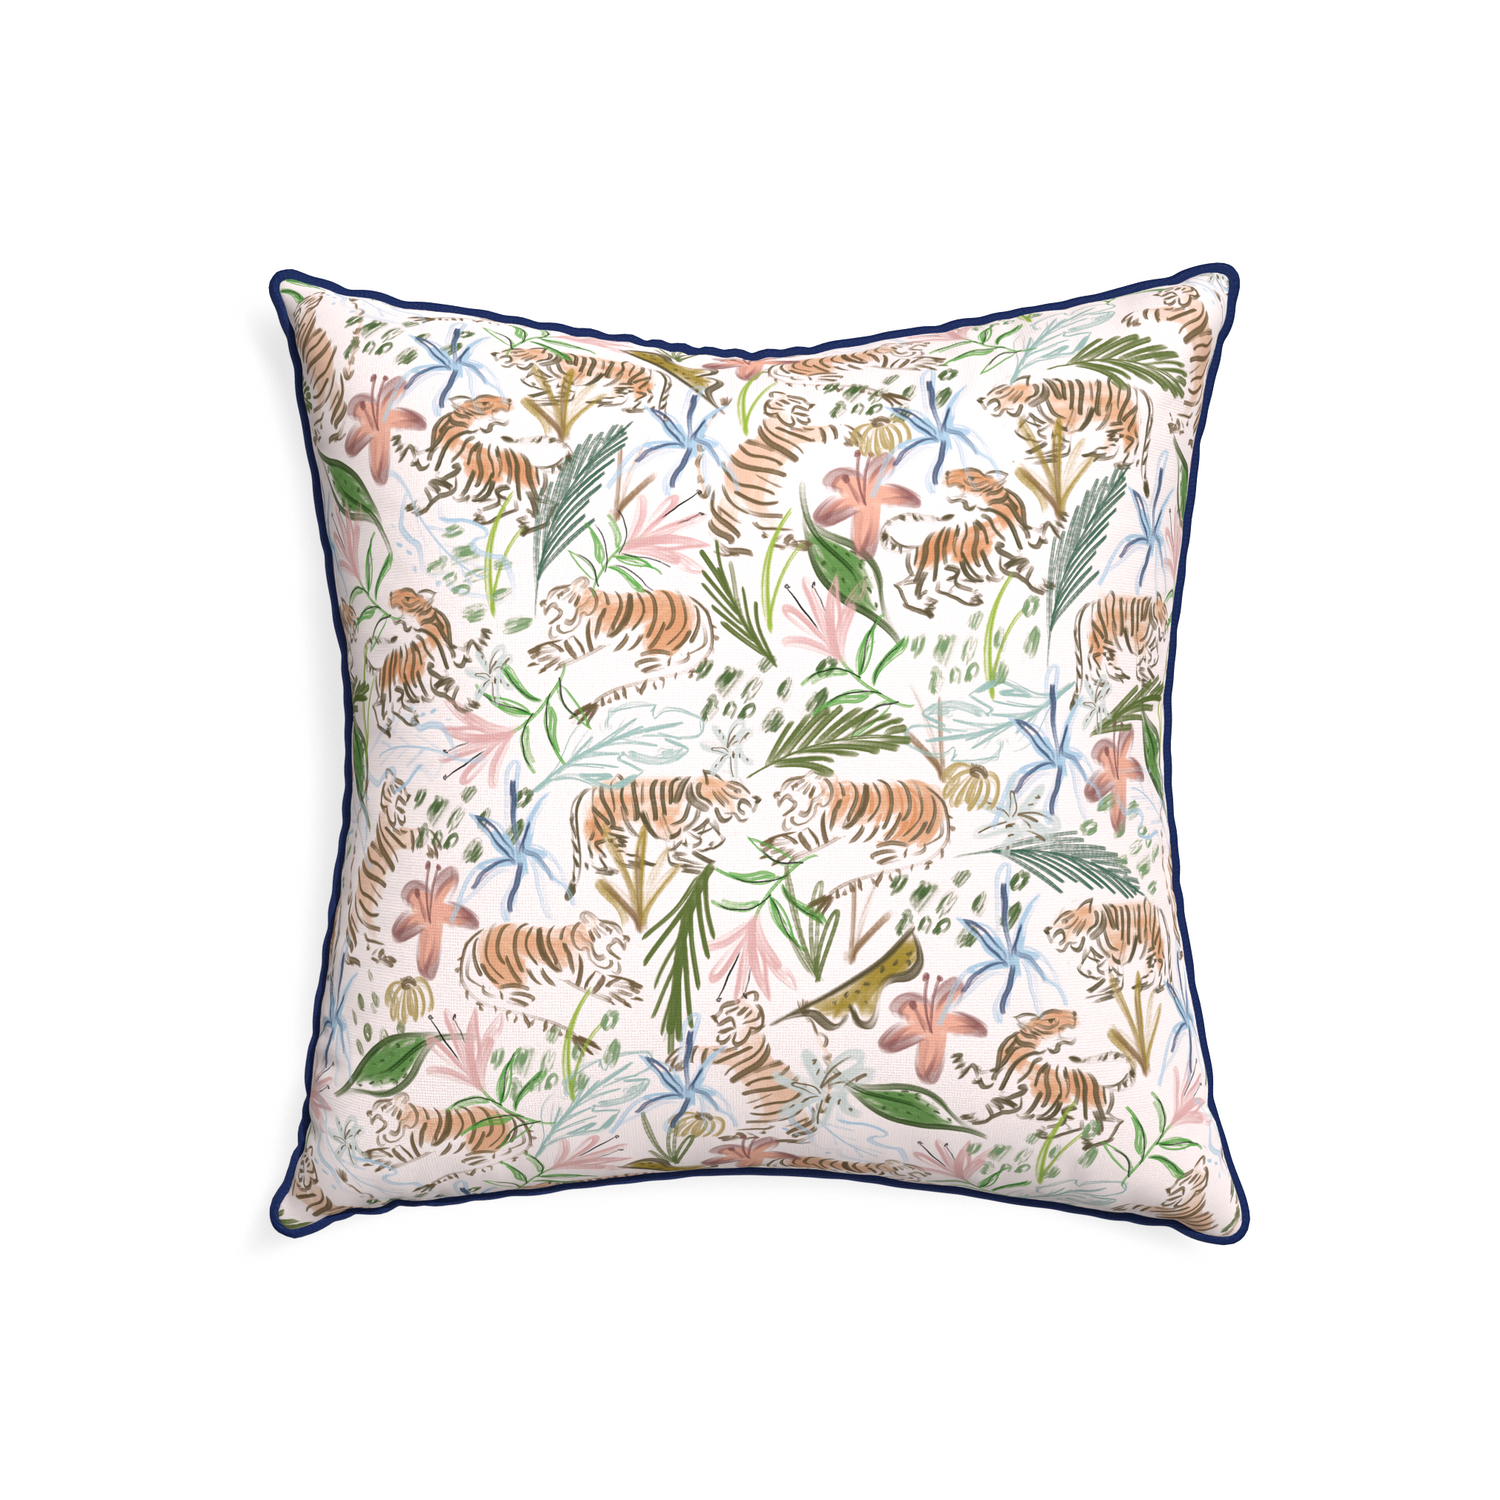 22-square frida pink custom pink chinoiserie tigerpillow with midnight piping on white background